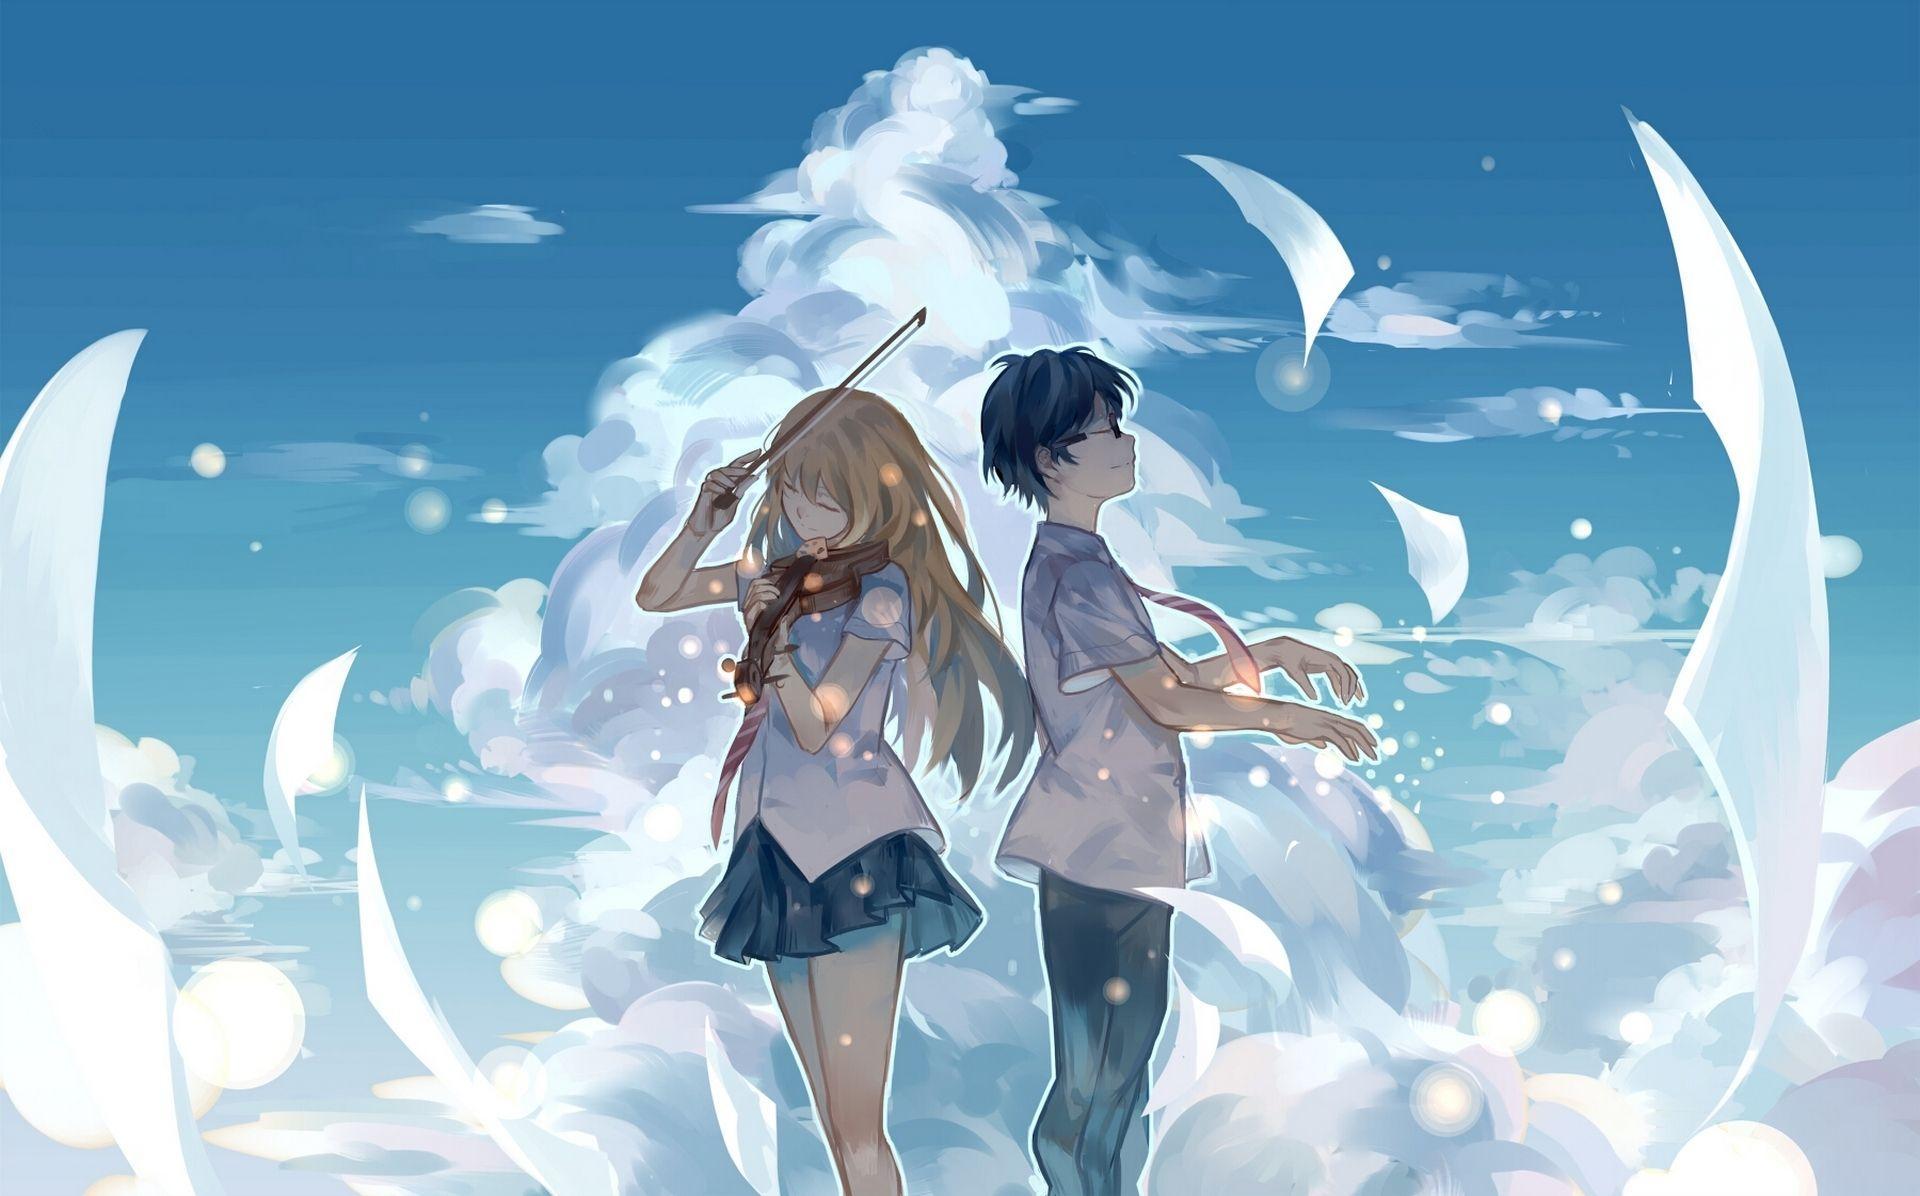 Your Lie In April HD Wallpaper